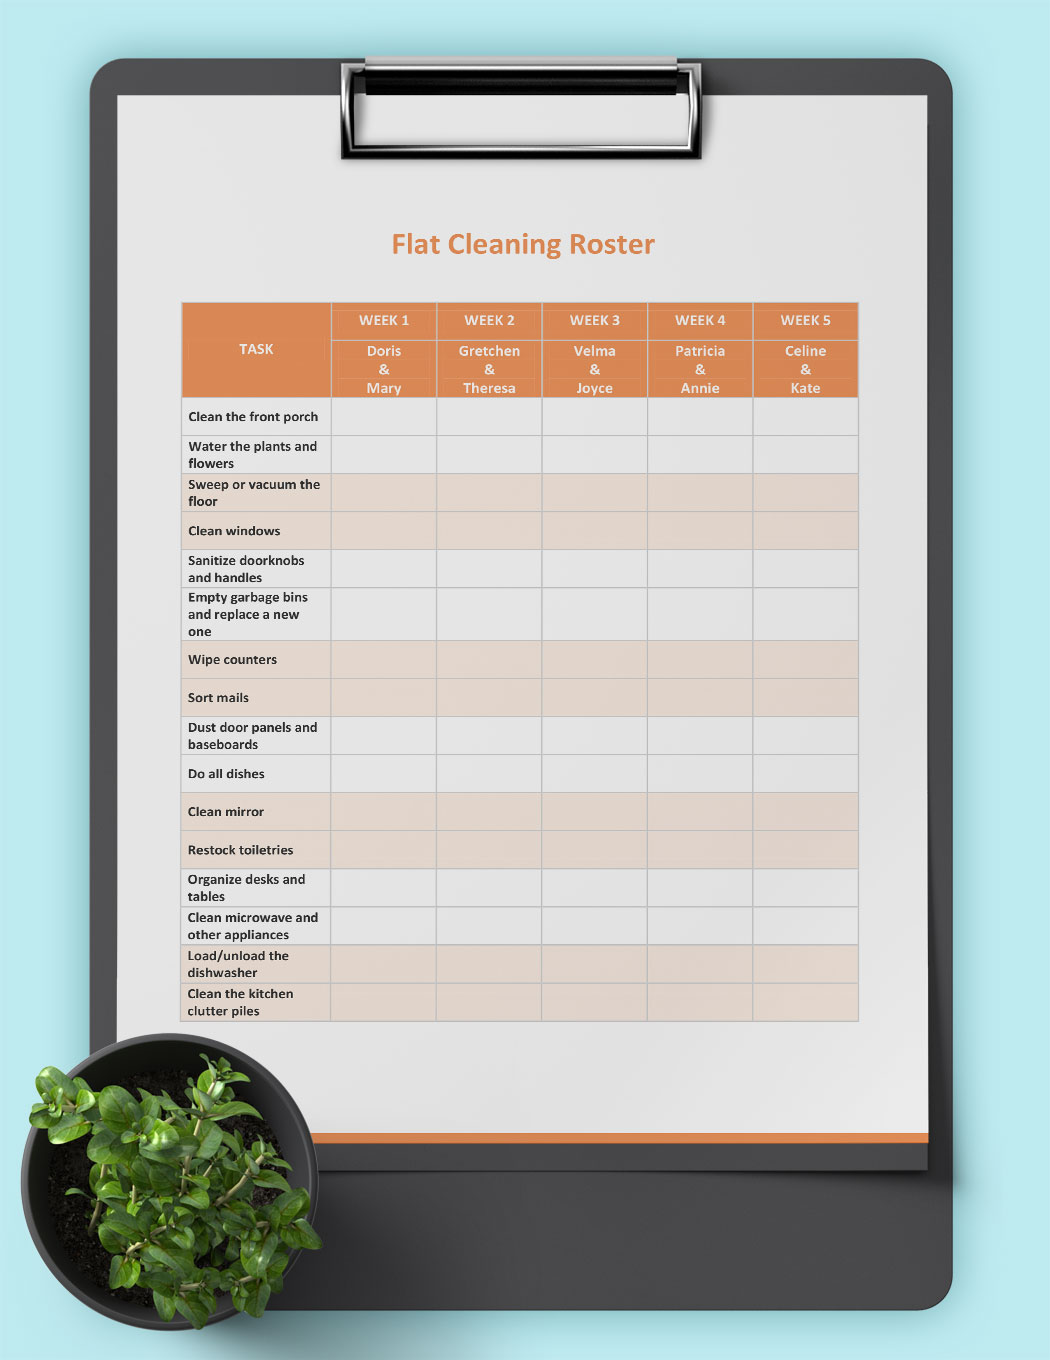 Flat Cleaning Roster Template